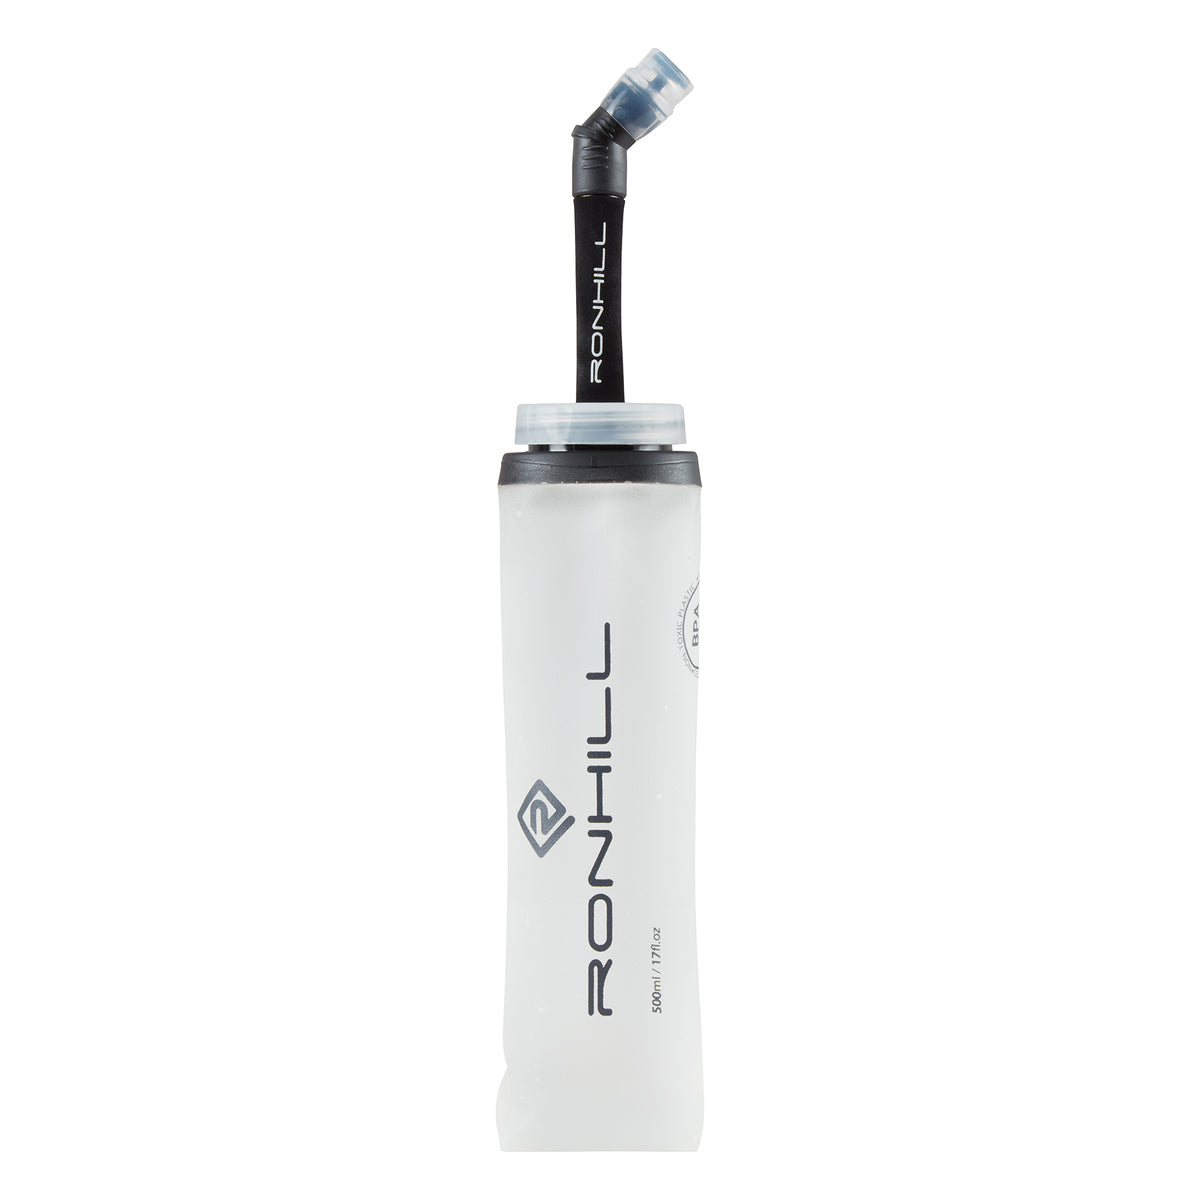 Ronhill 500ml Fuel Flask with Straw: White